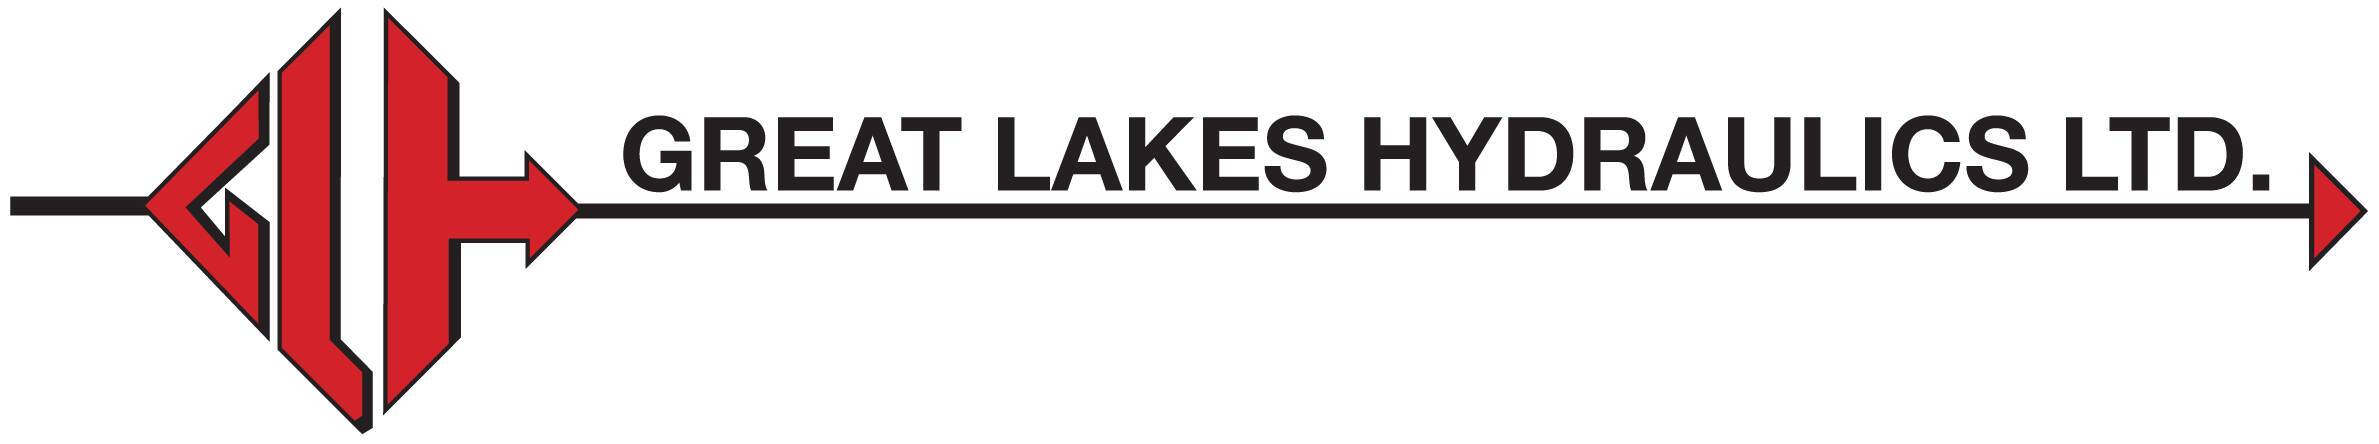 Great Lakes Hydraulics